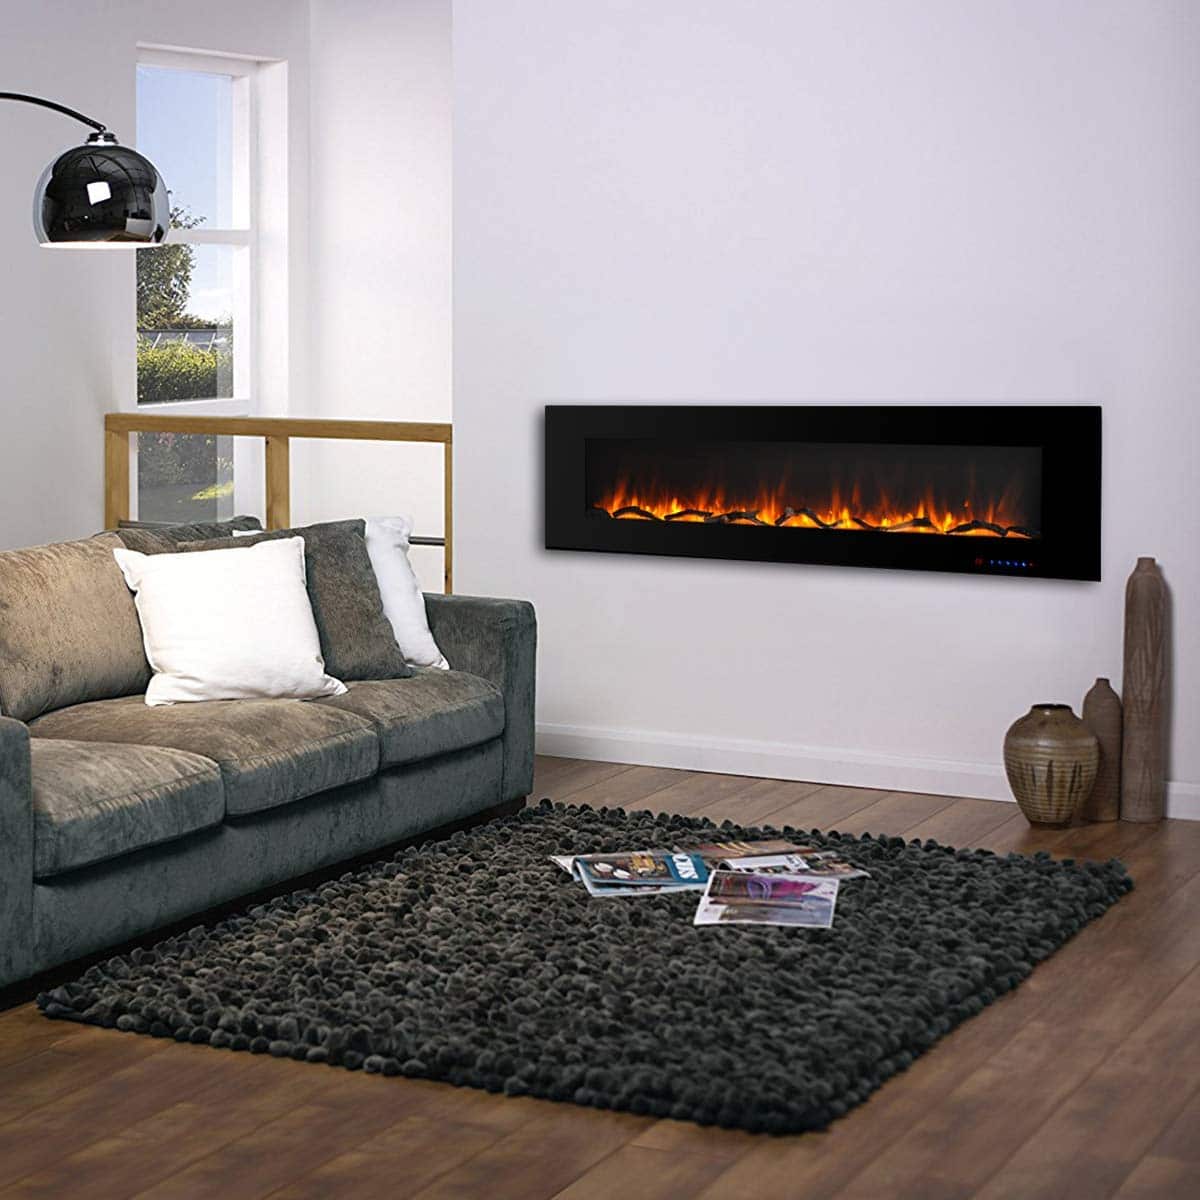 12 Best Linear Electric Fireplace You Can Buy in 2020